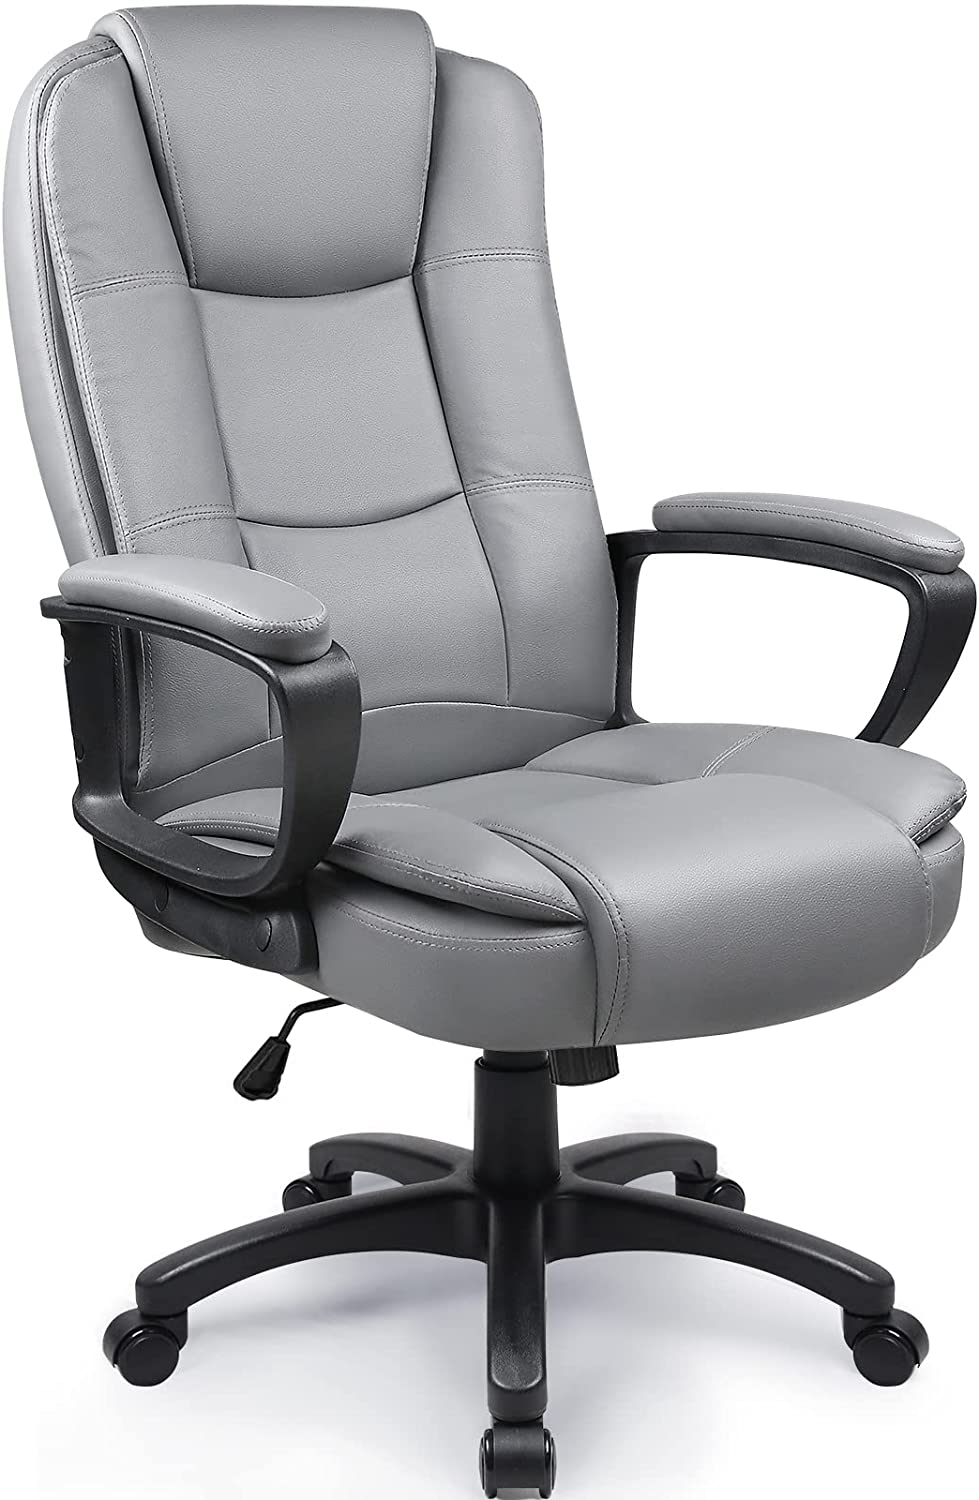 Black-Faux-Leather-Seat-Adjustable-Executive-Chair-Metal-Back-Steel-Frame-Office-Chairs